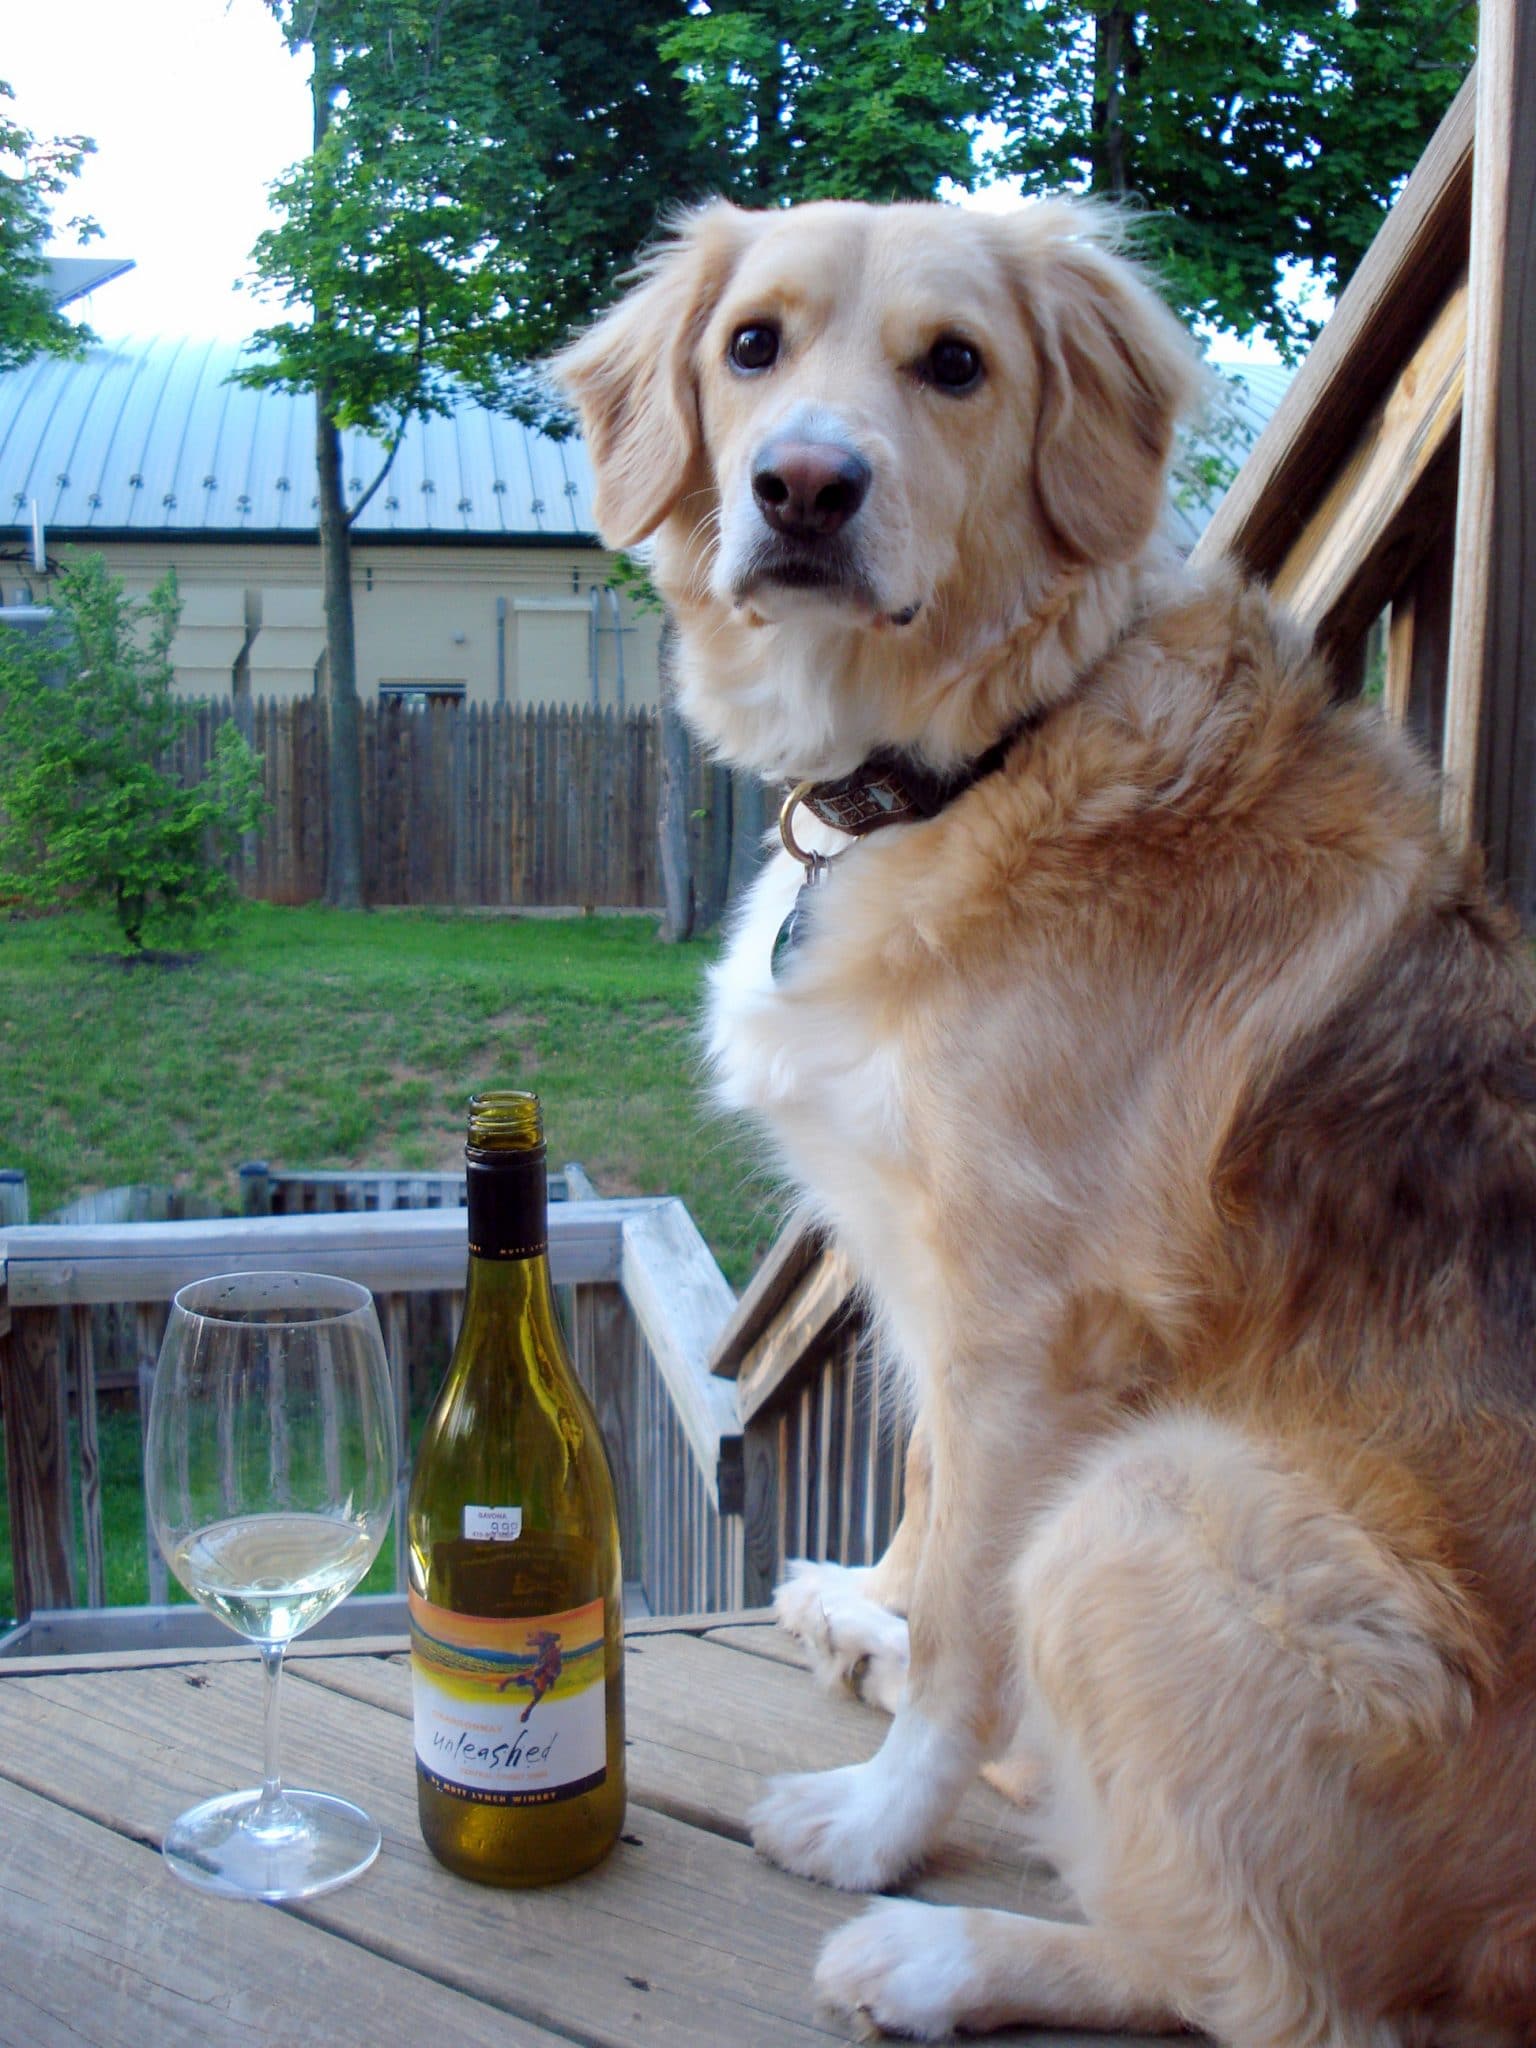 Dog pictured with wine and glass